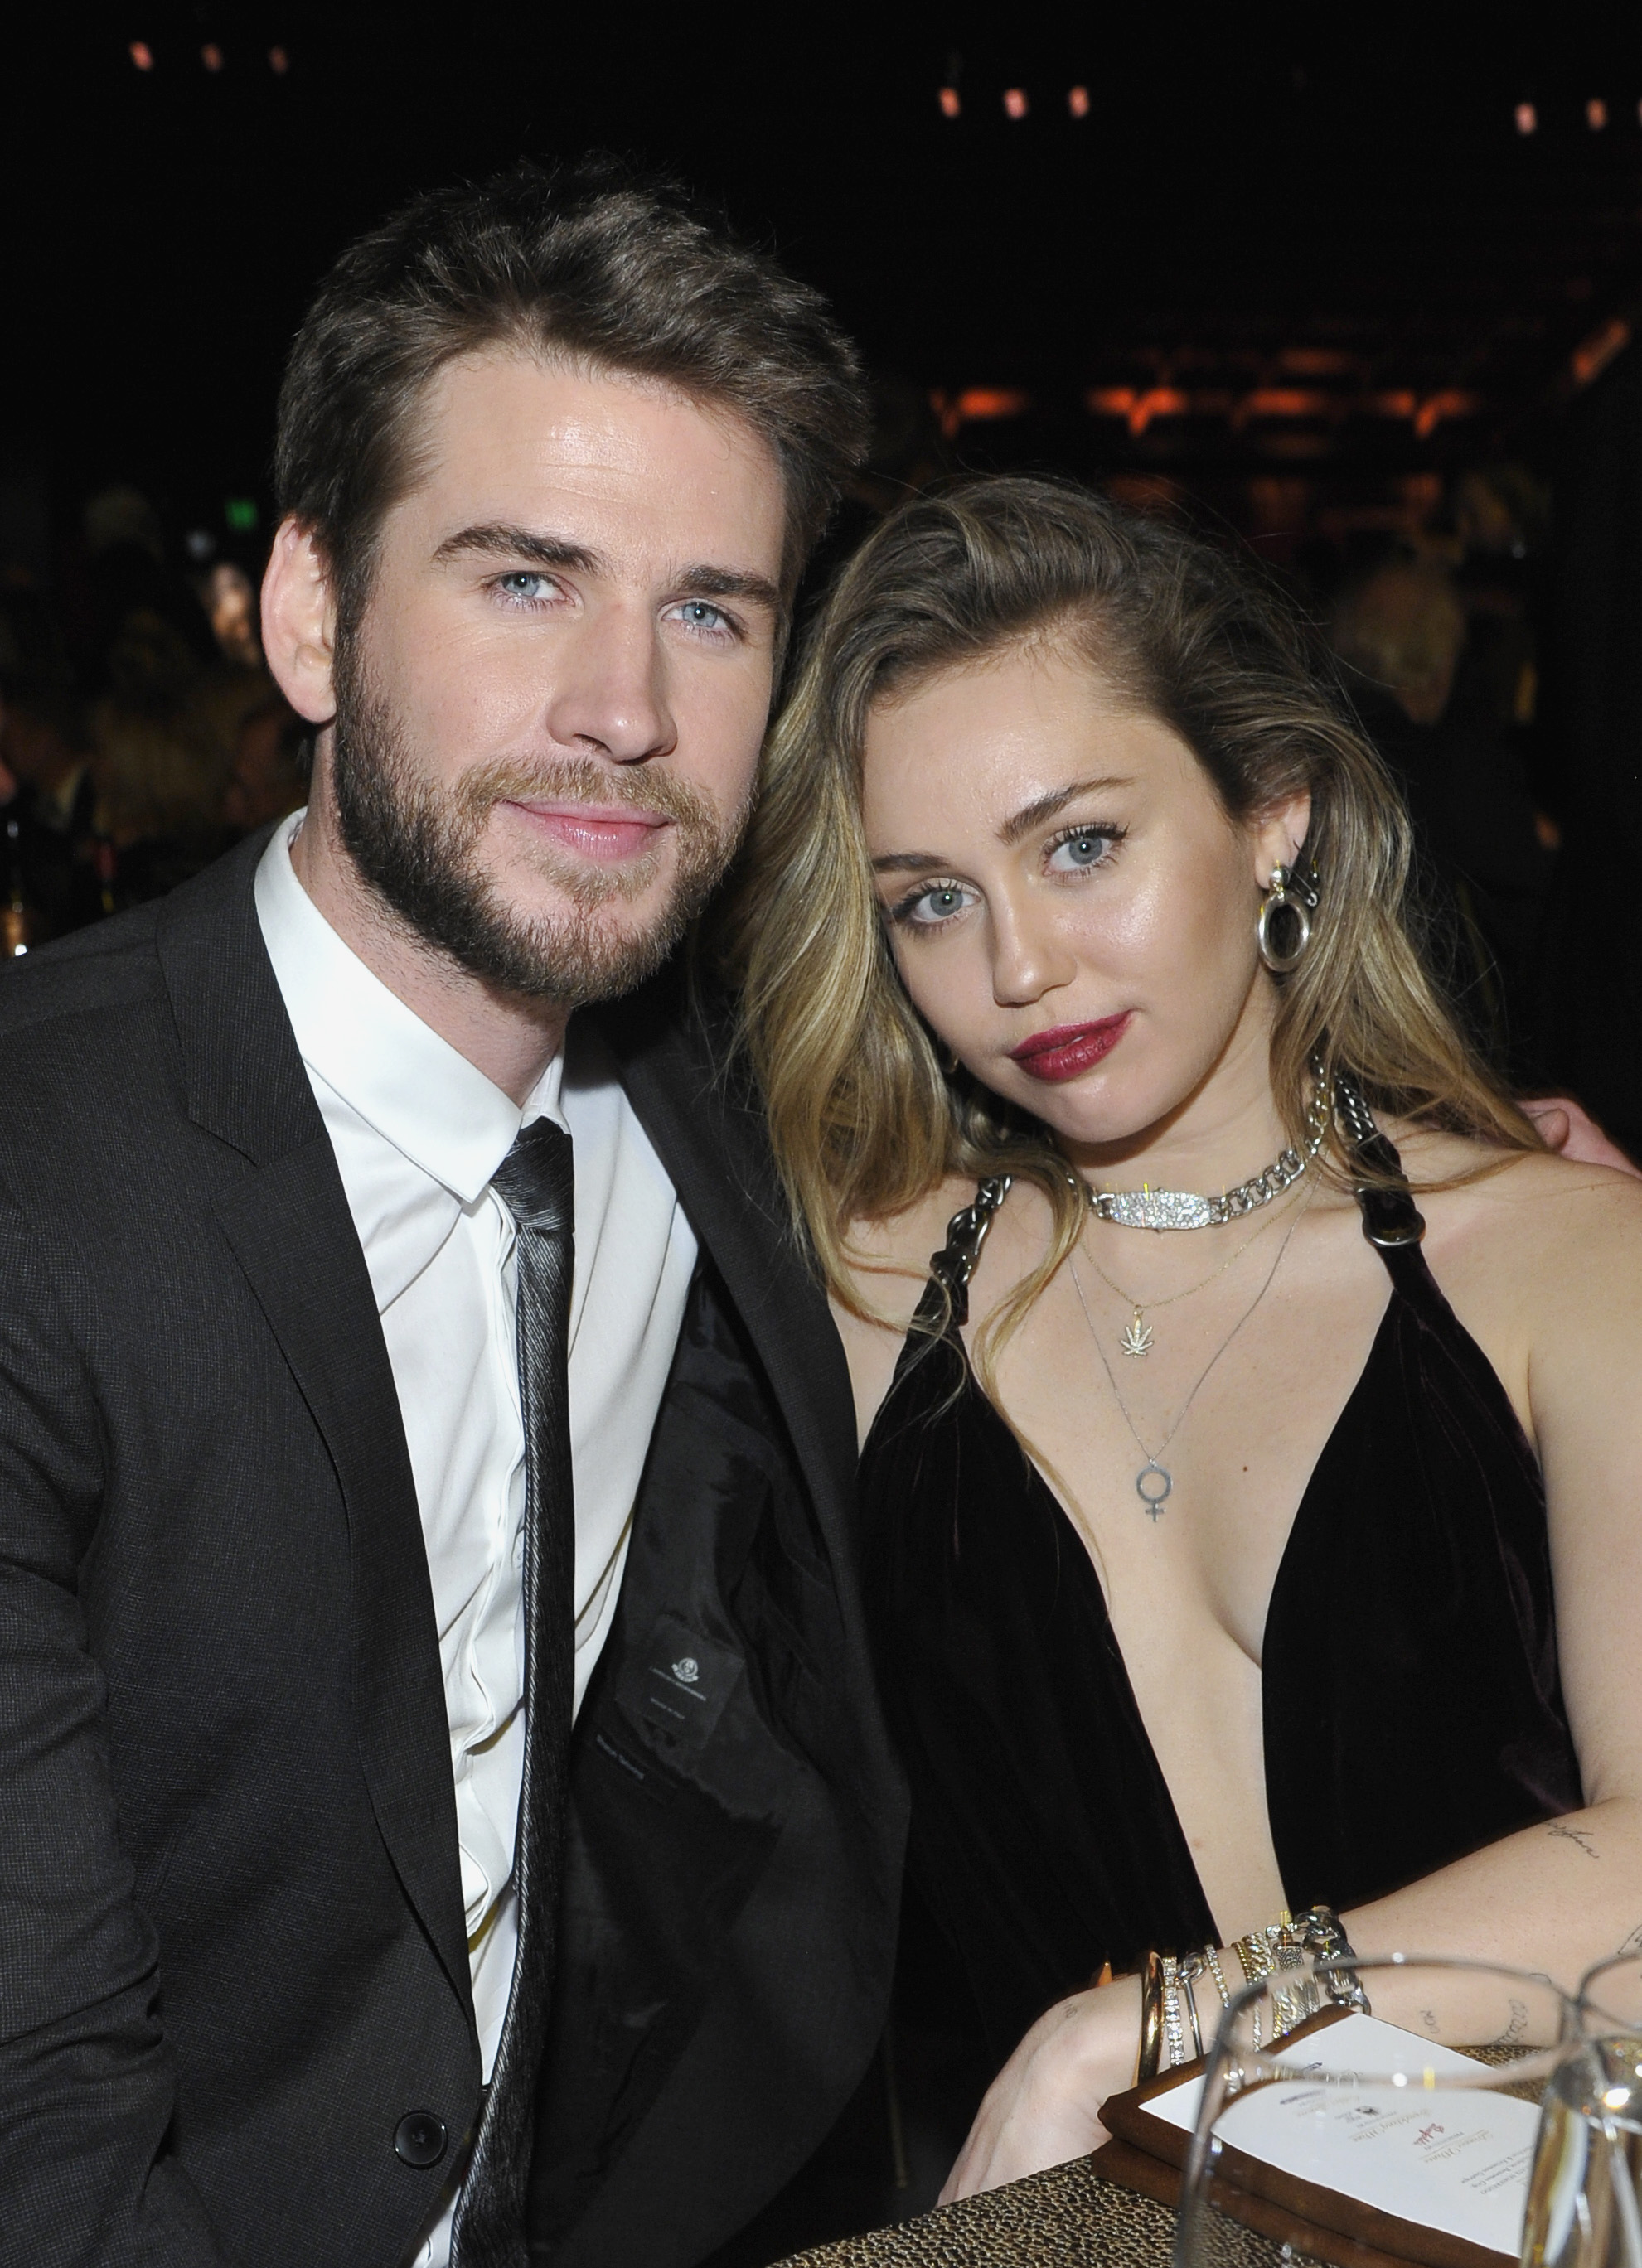 Miley Cyrus and Liam Hemsworth Make First Married Appearance